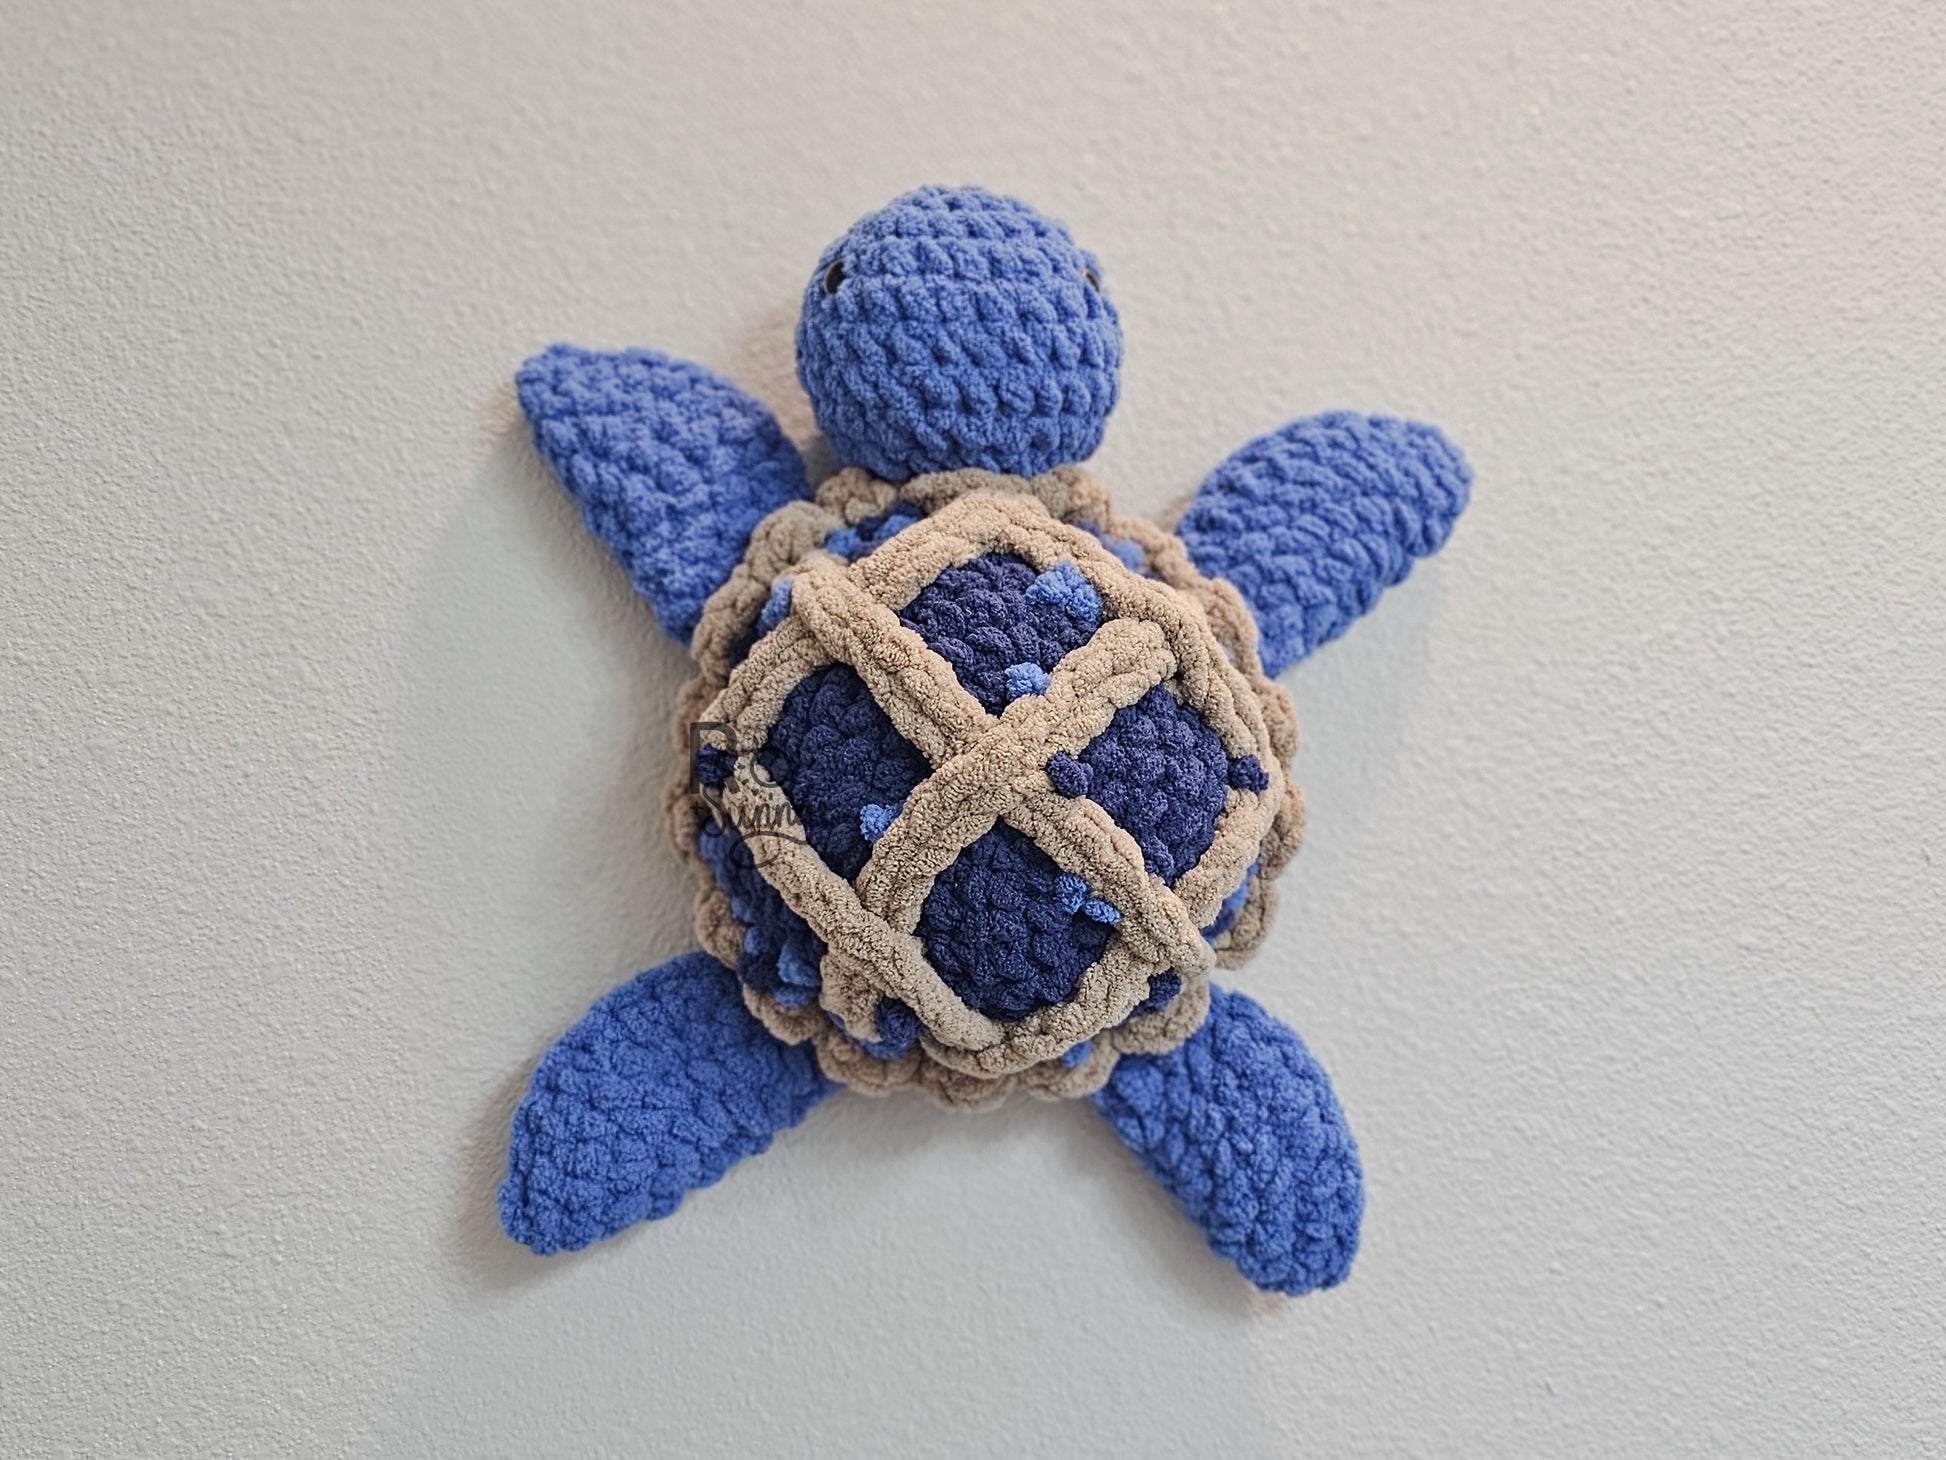 Blueberry Pie, Overhead, Lying Flat - Crochet sea turtle with a blue body and shell that looks like a lattice crusted blueberry pie.  Little blueberries are embroidered on the pie shell to add texture. 